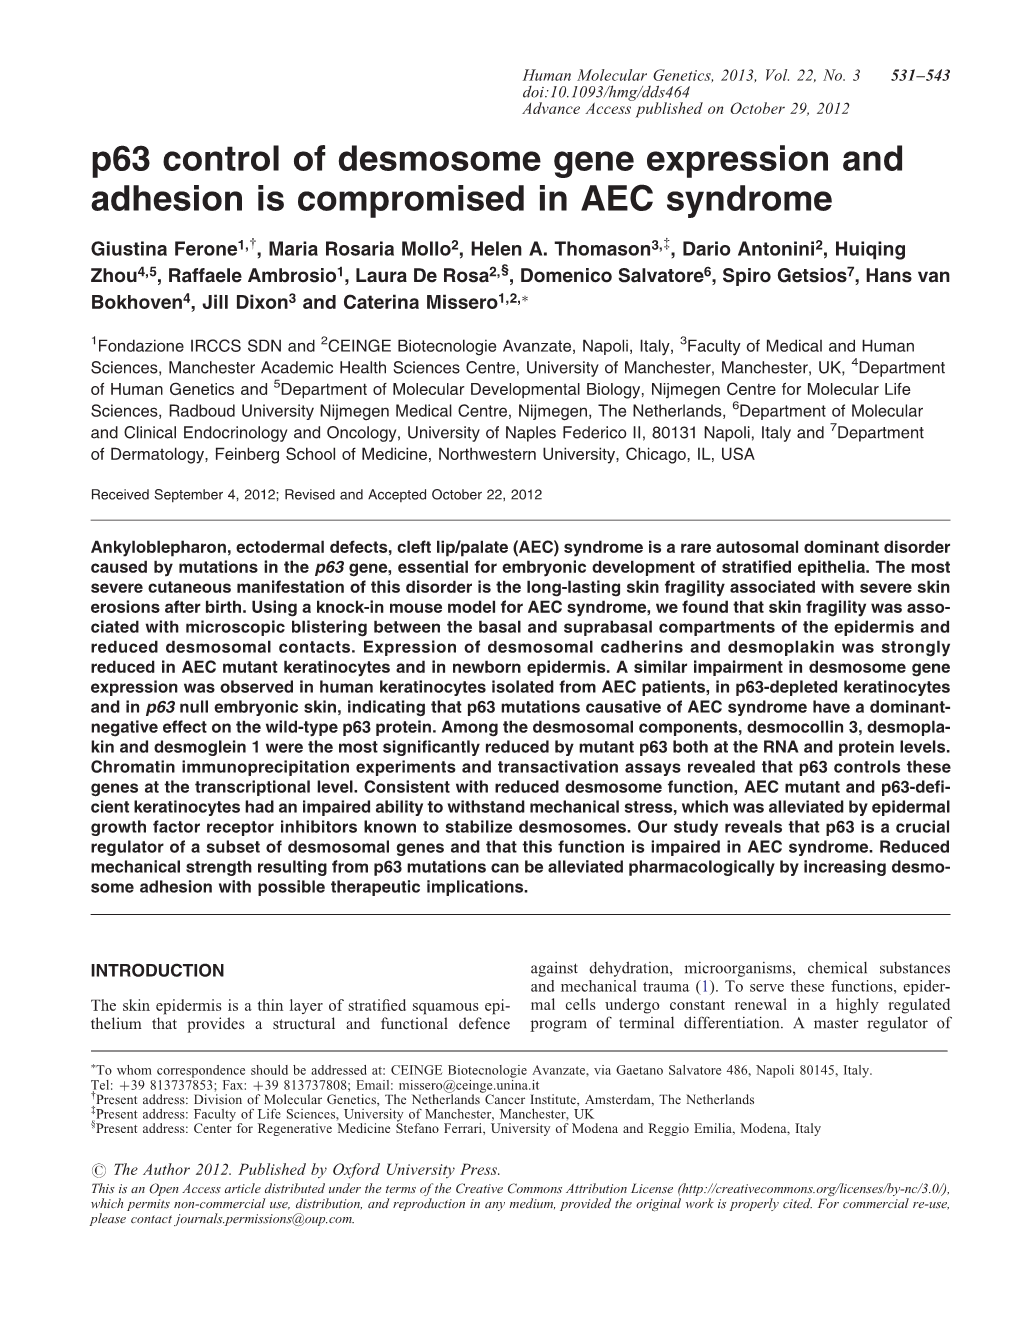 P63 Control of Desmosome Gene Expression and Adhesion Is Compromised in AEC Syndrome